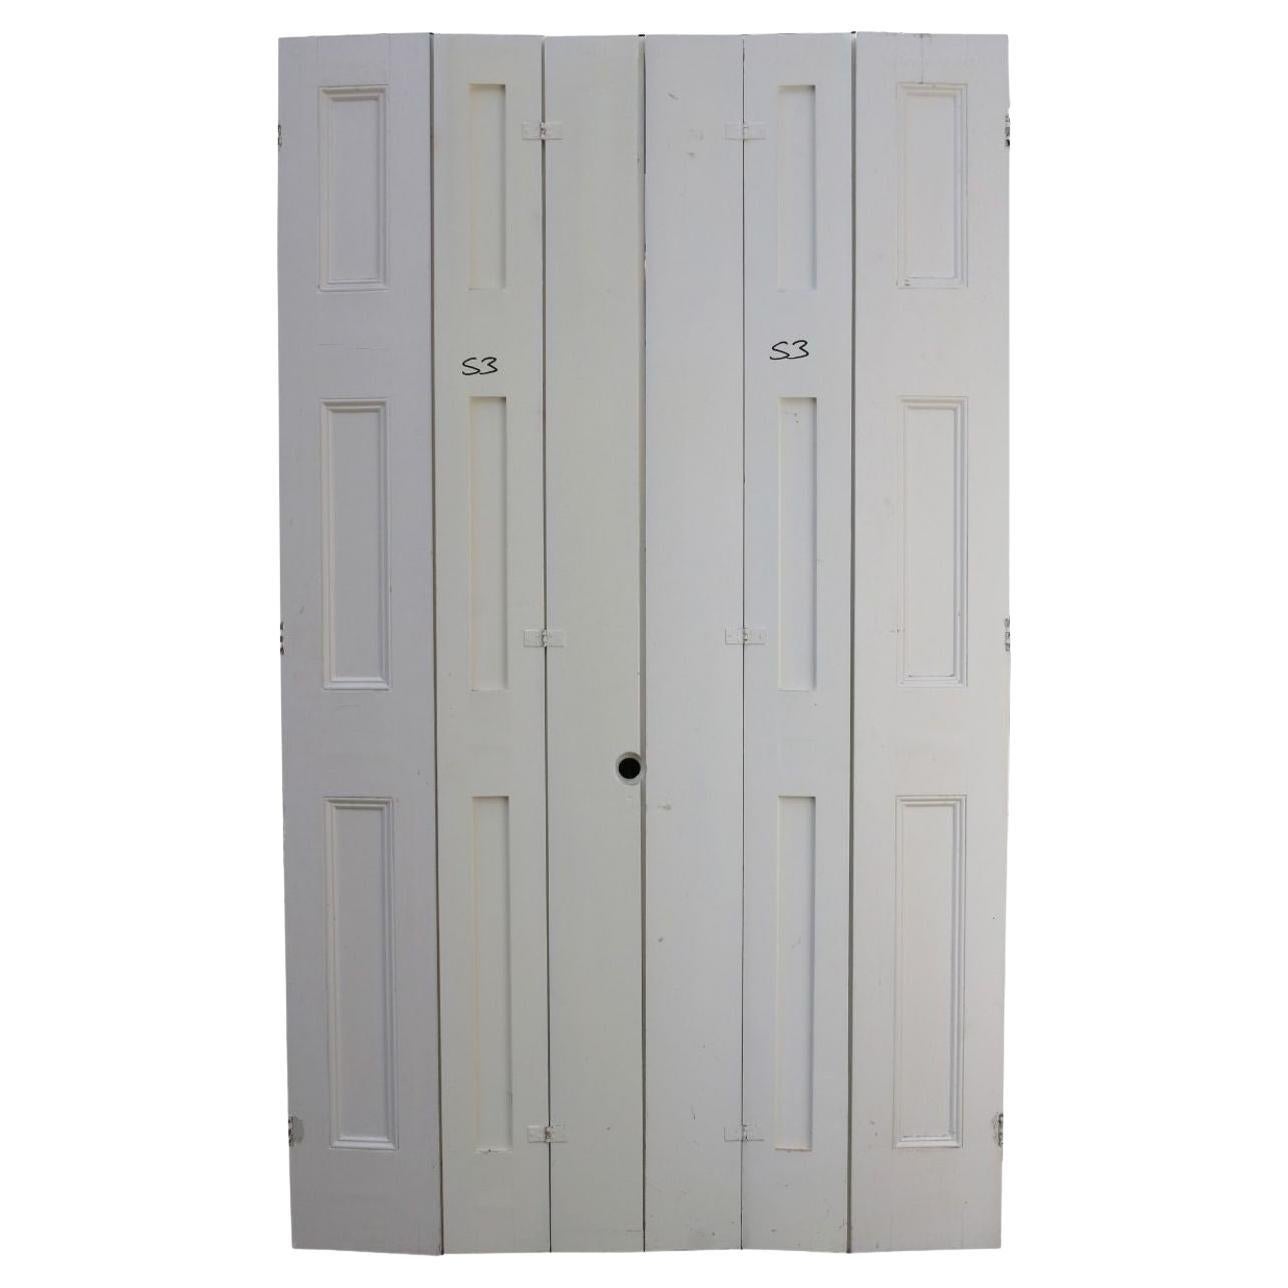 What is the best wood to use for shutters?